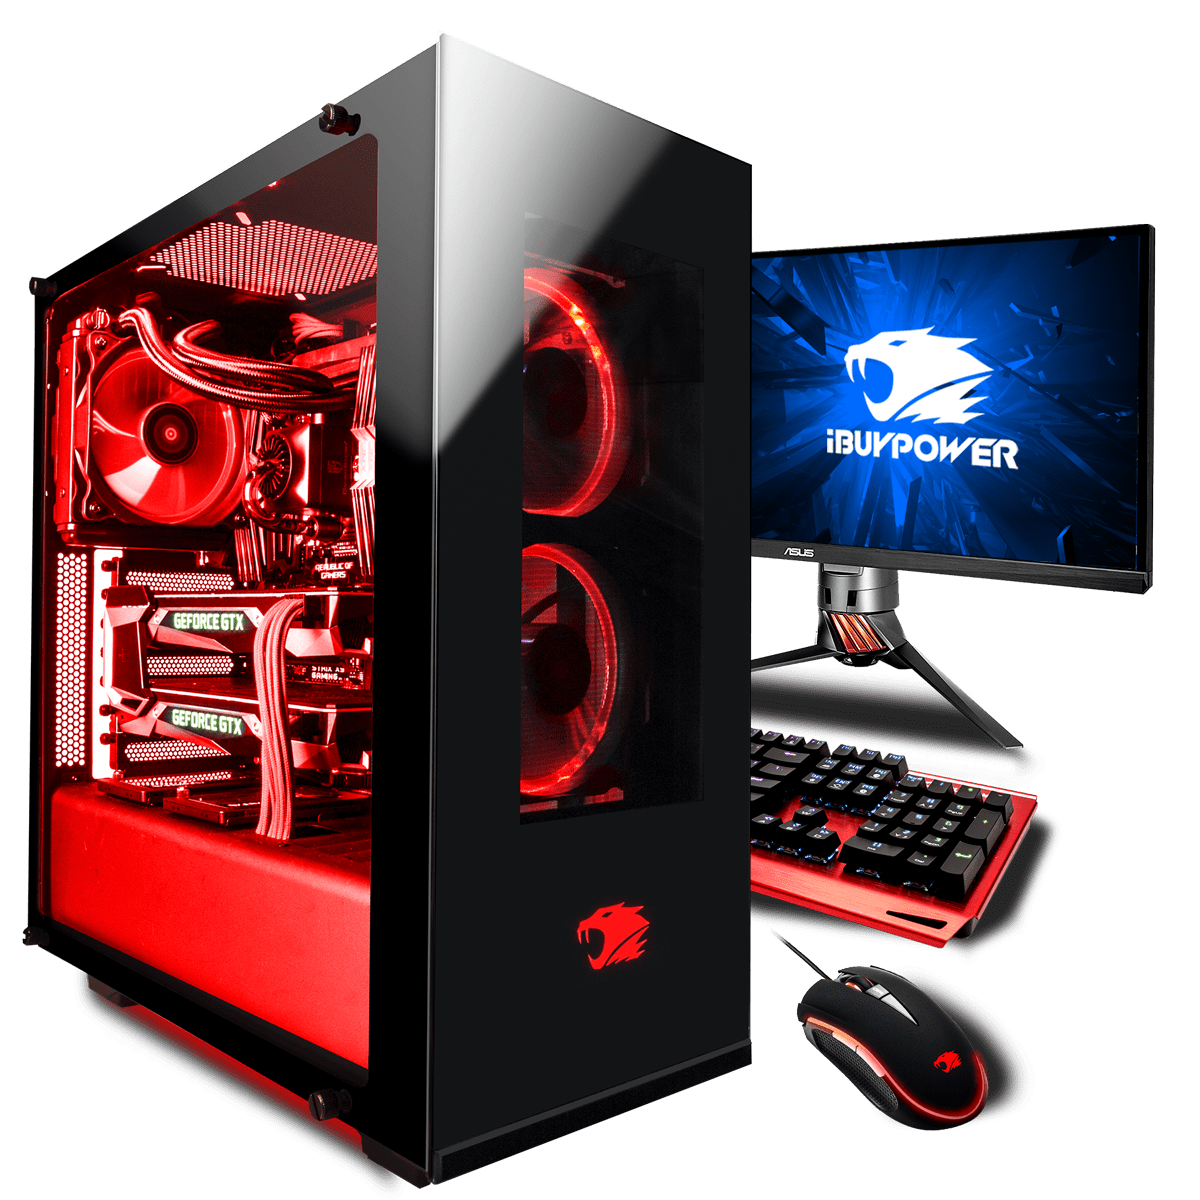 Final Words and Conclusion - iBuyPower Element Gaming PC Review: i7